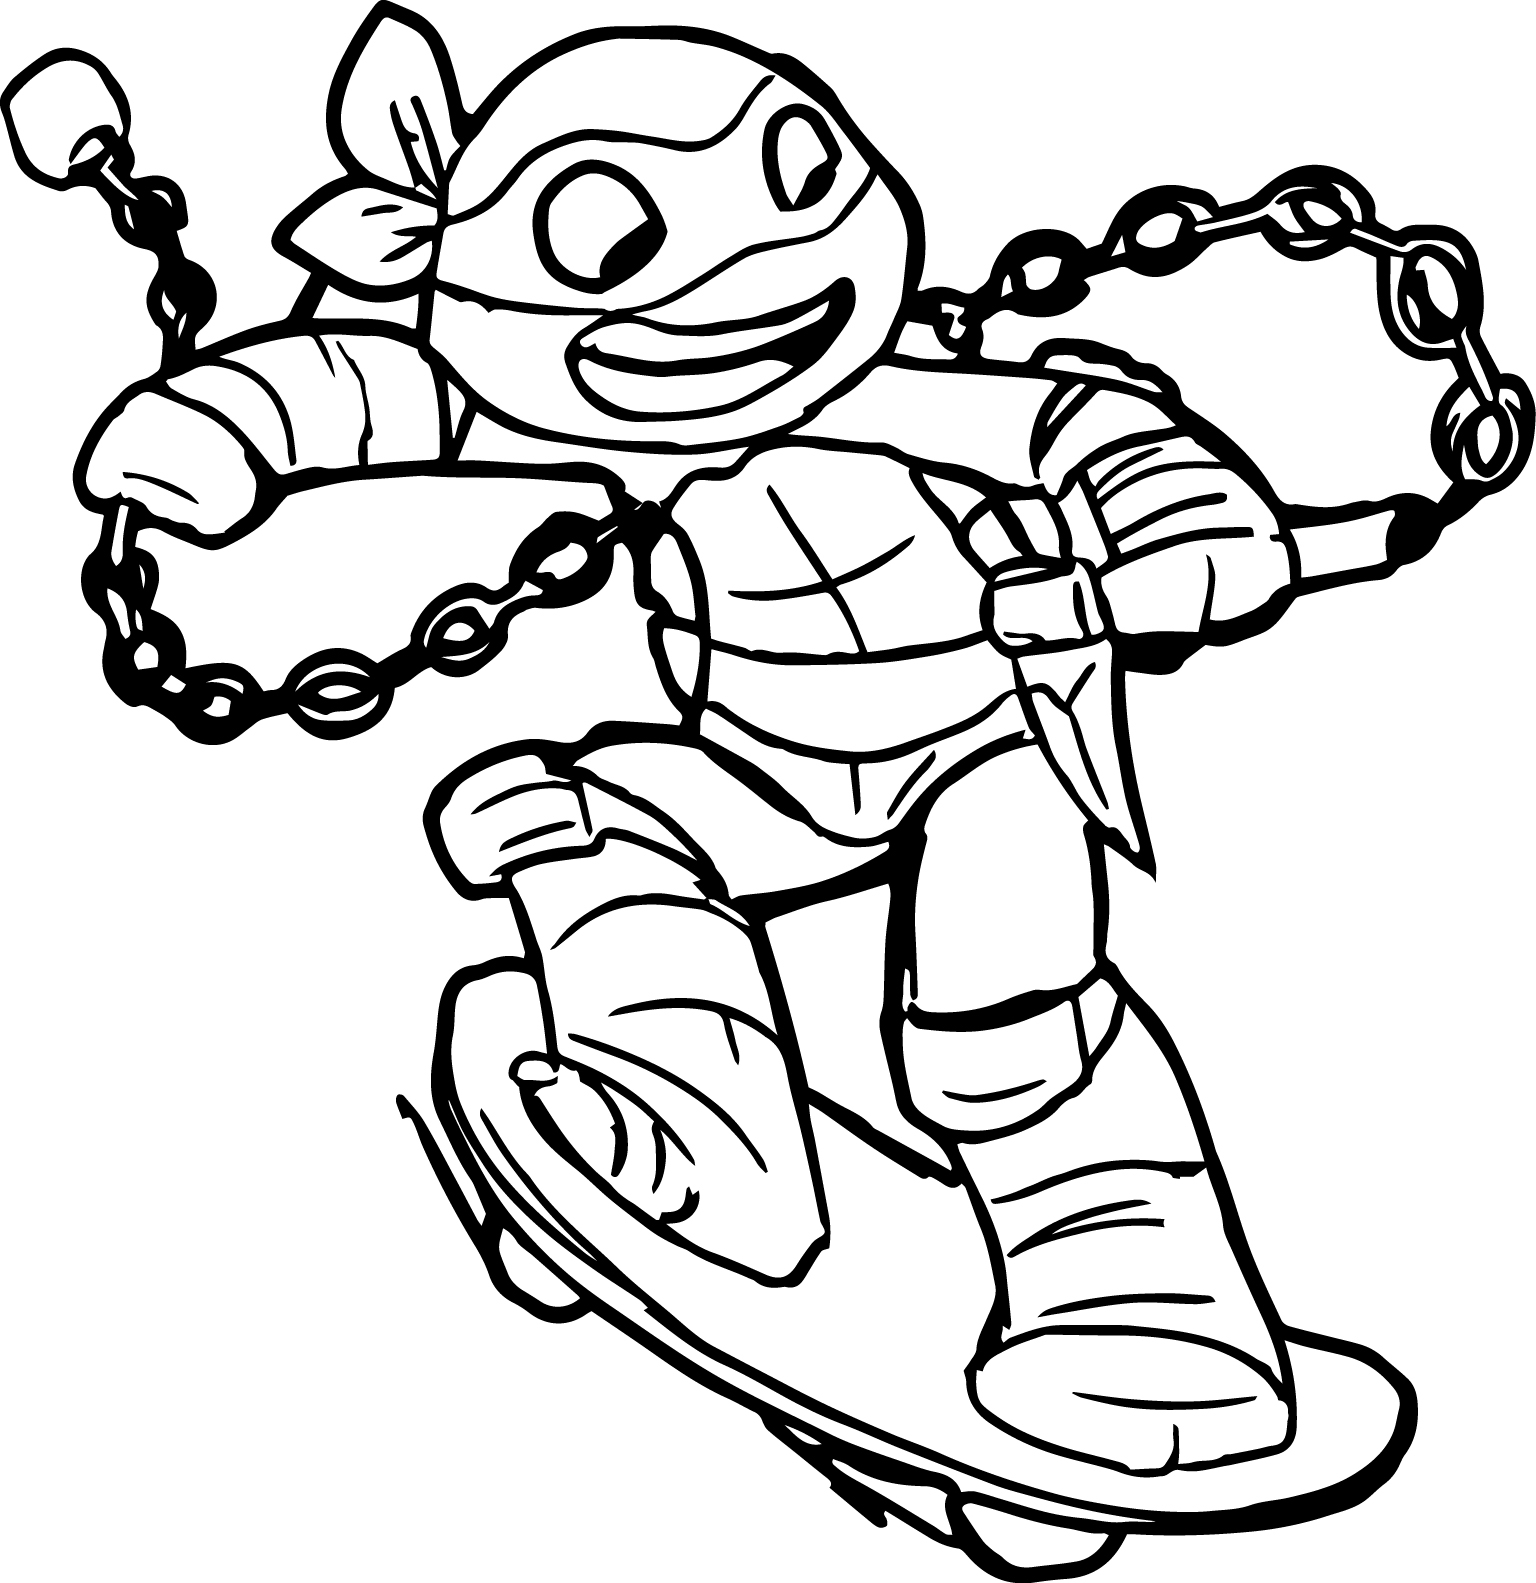 Download Yertle The Turtle Coloring Pages - Coloring Home